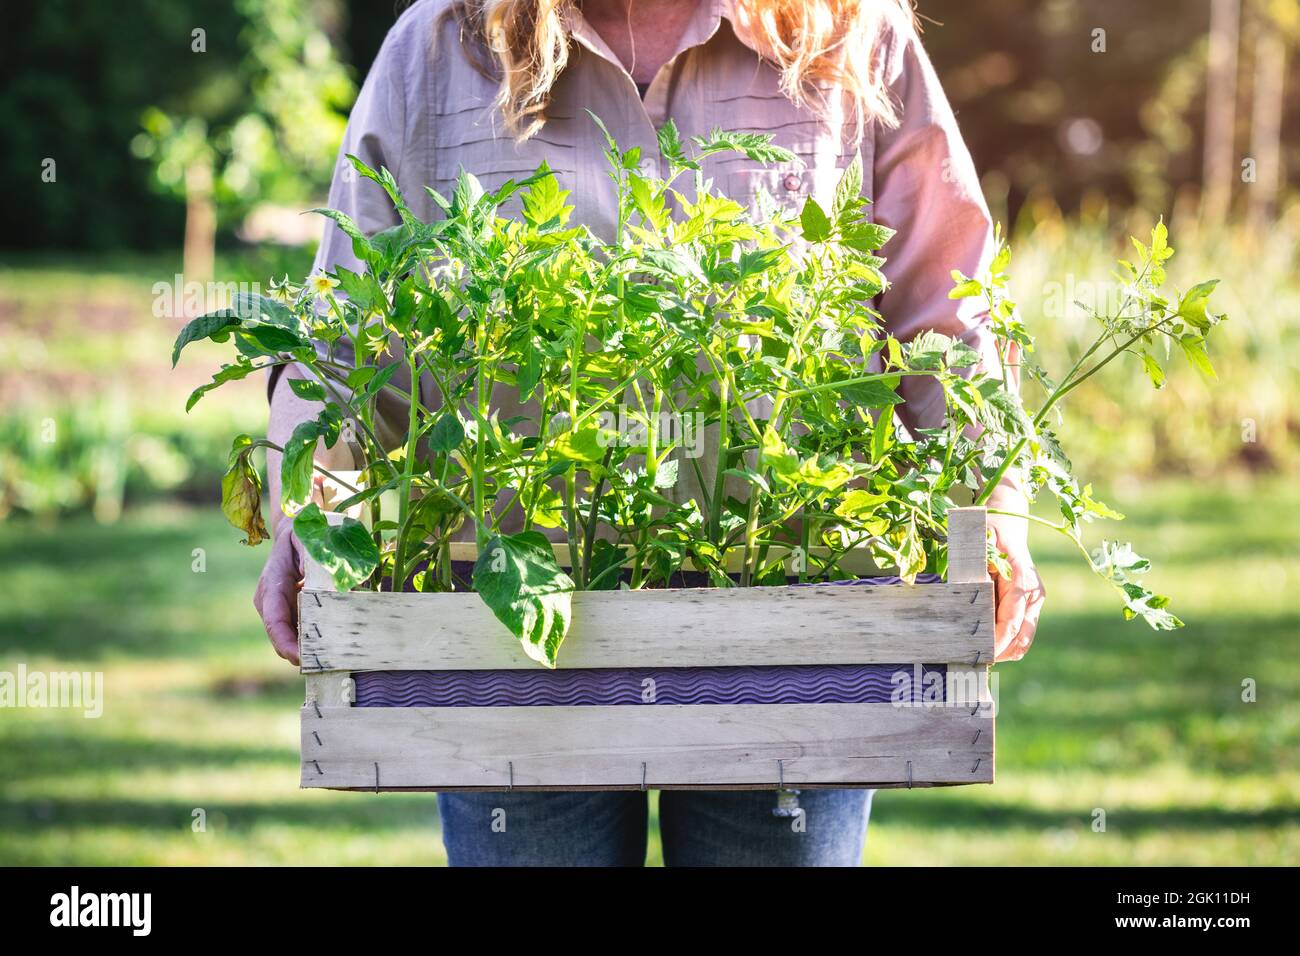 Woman gardener holding tomato seedling in crate ready for planting in organic garden. Planting and gardening in spring Stock Photo